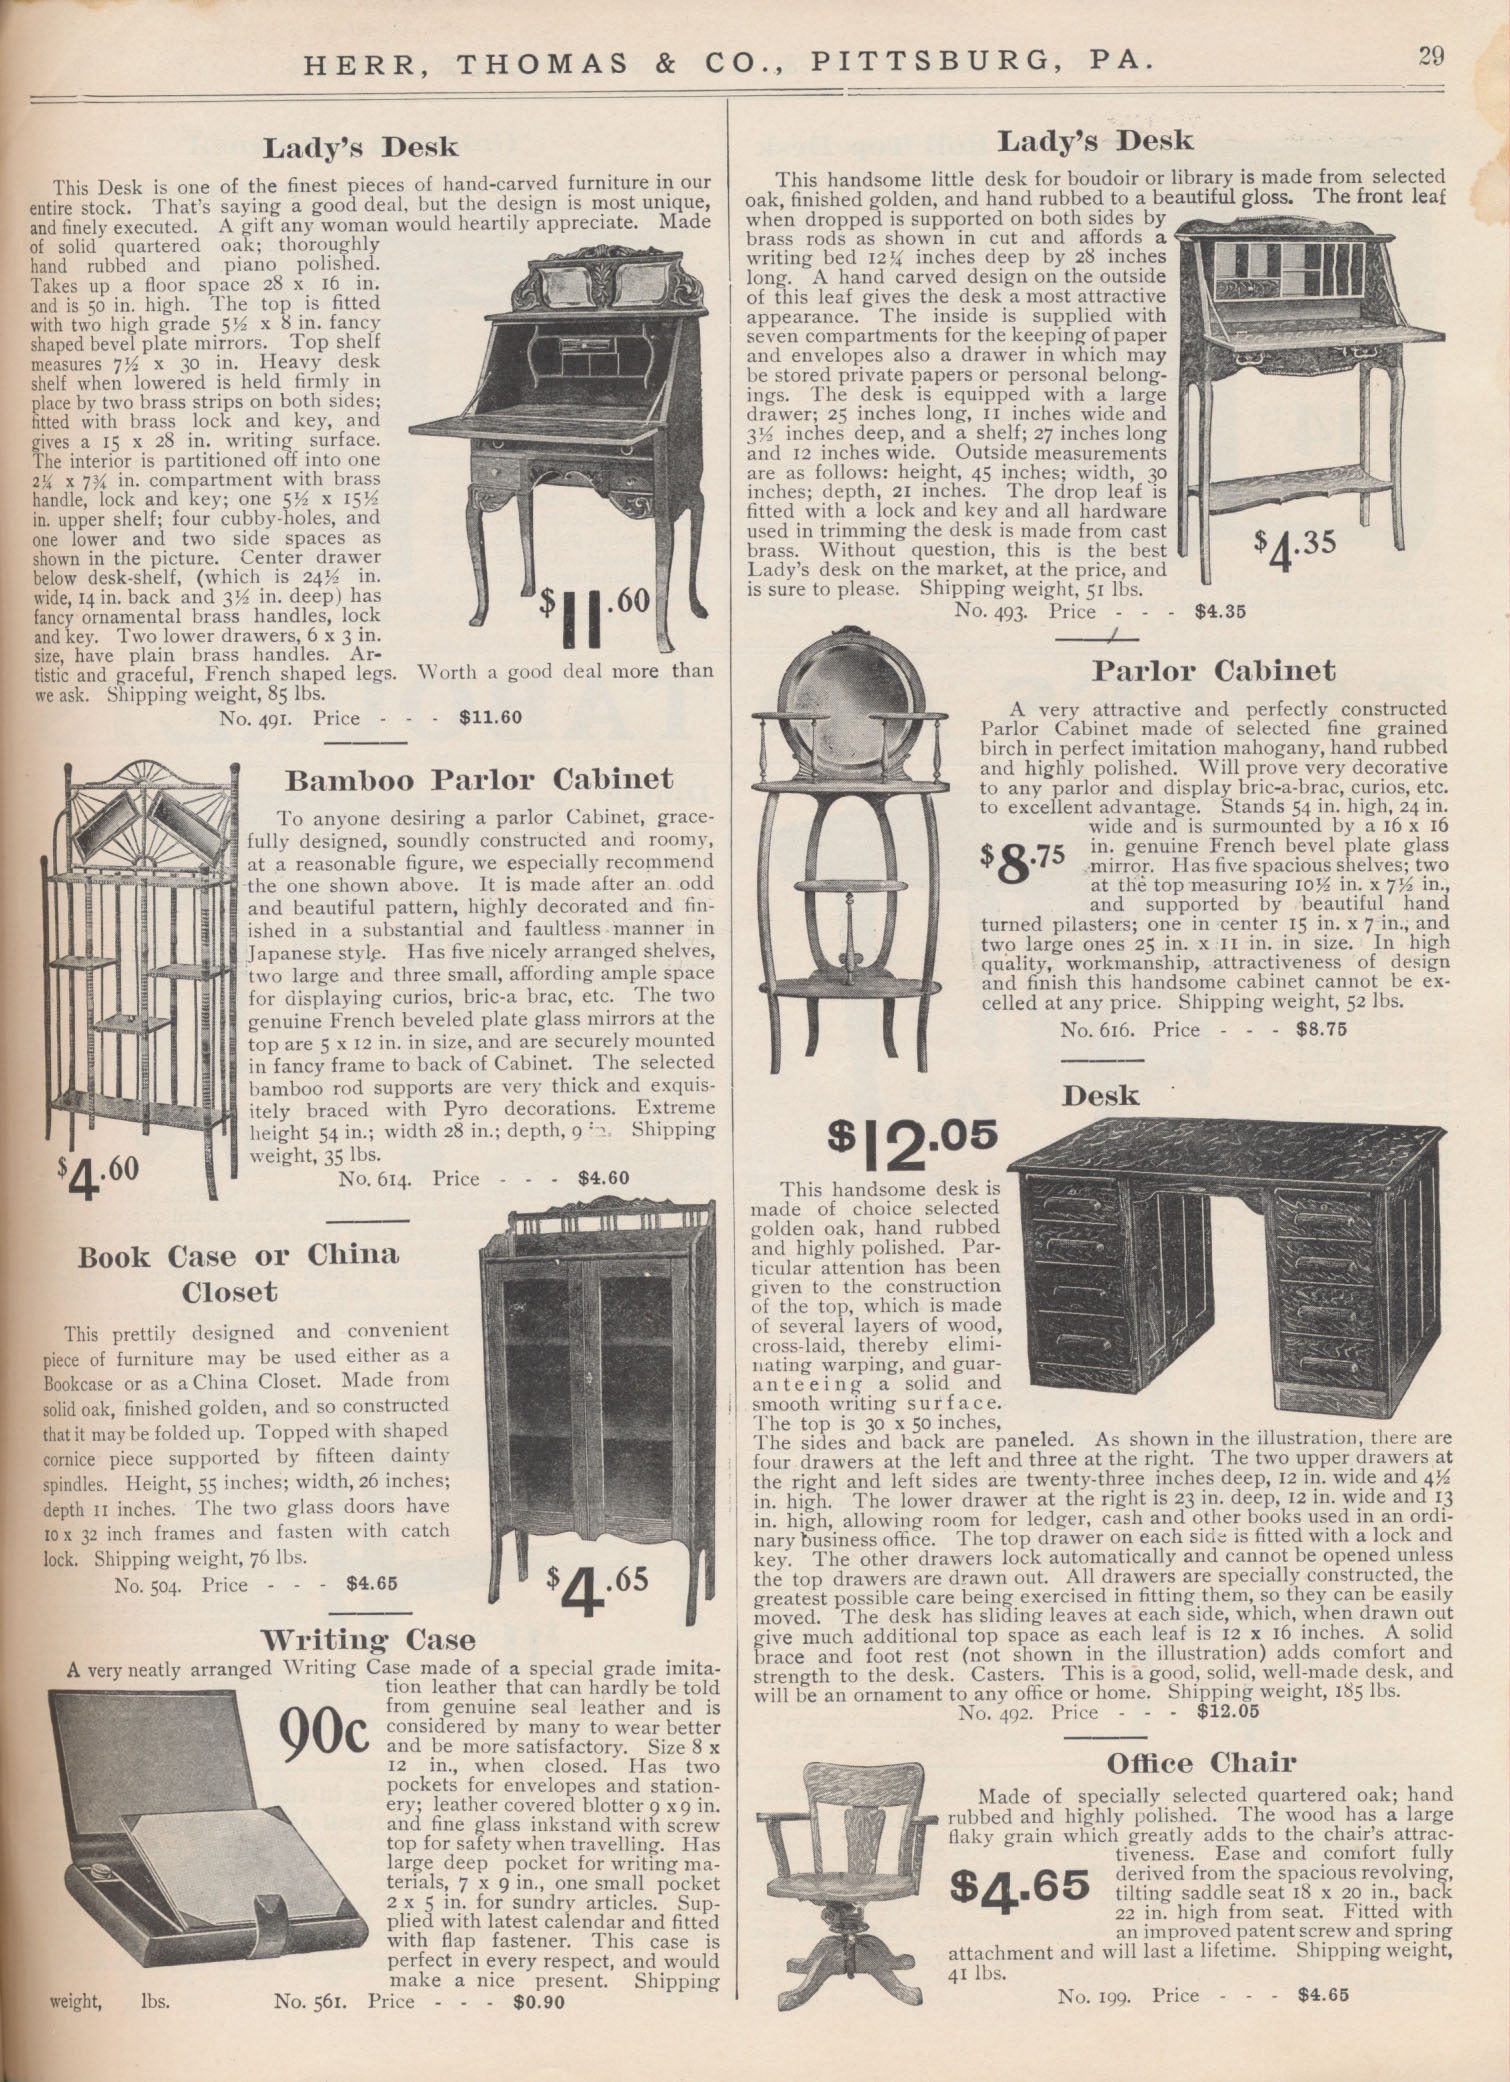 https://blog.library.si.edu/wp-content/uploads/2020/08/Herr-Thomas-Co.-Catalogue-No.-101-furniture-page-29.jpg